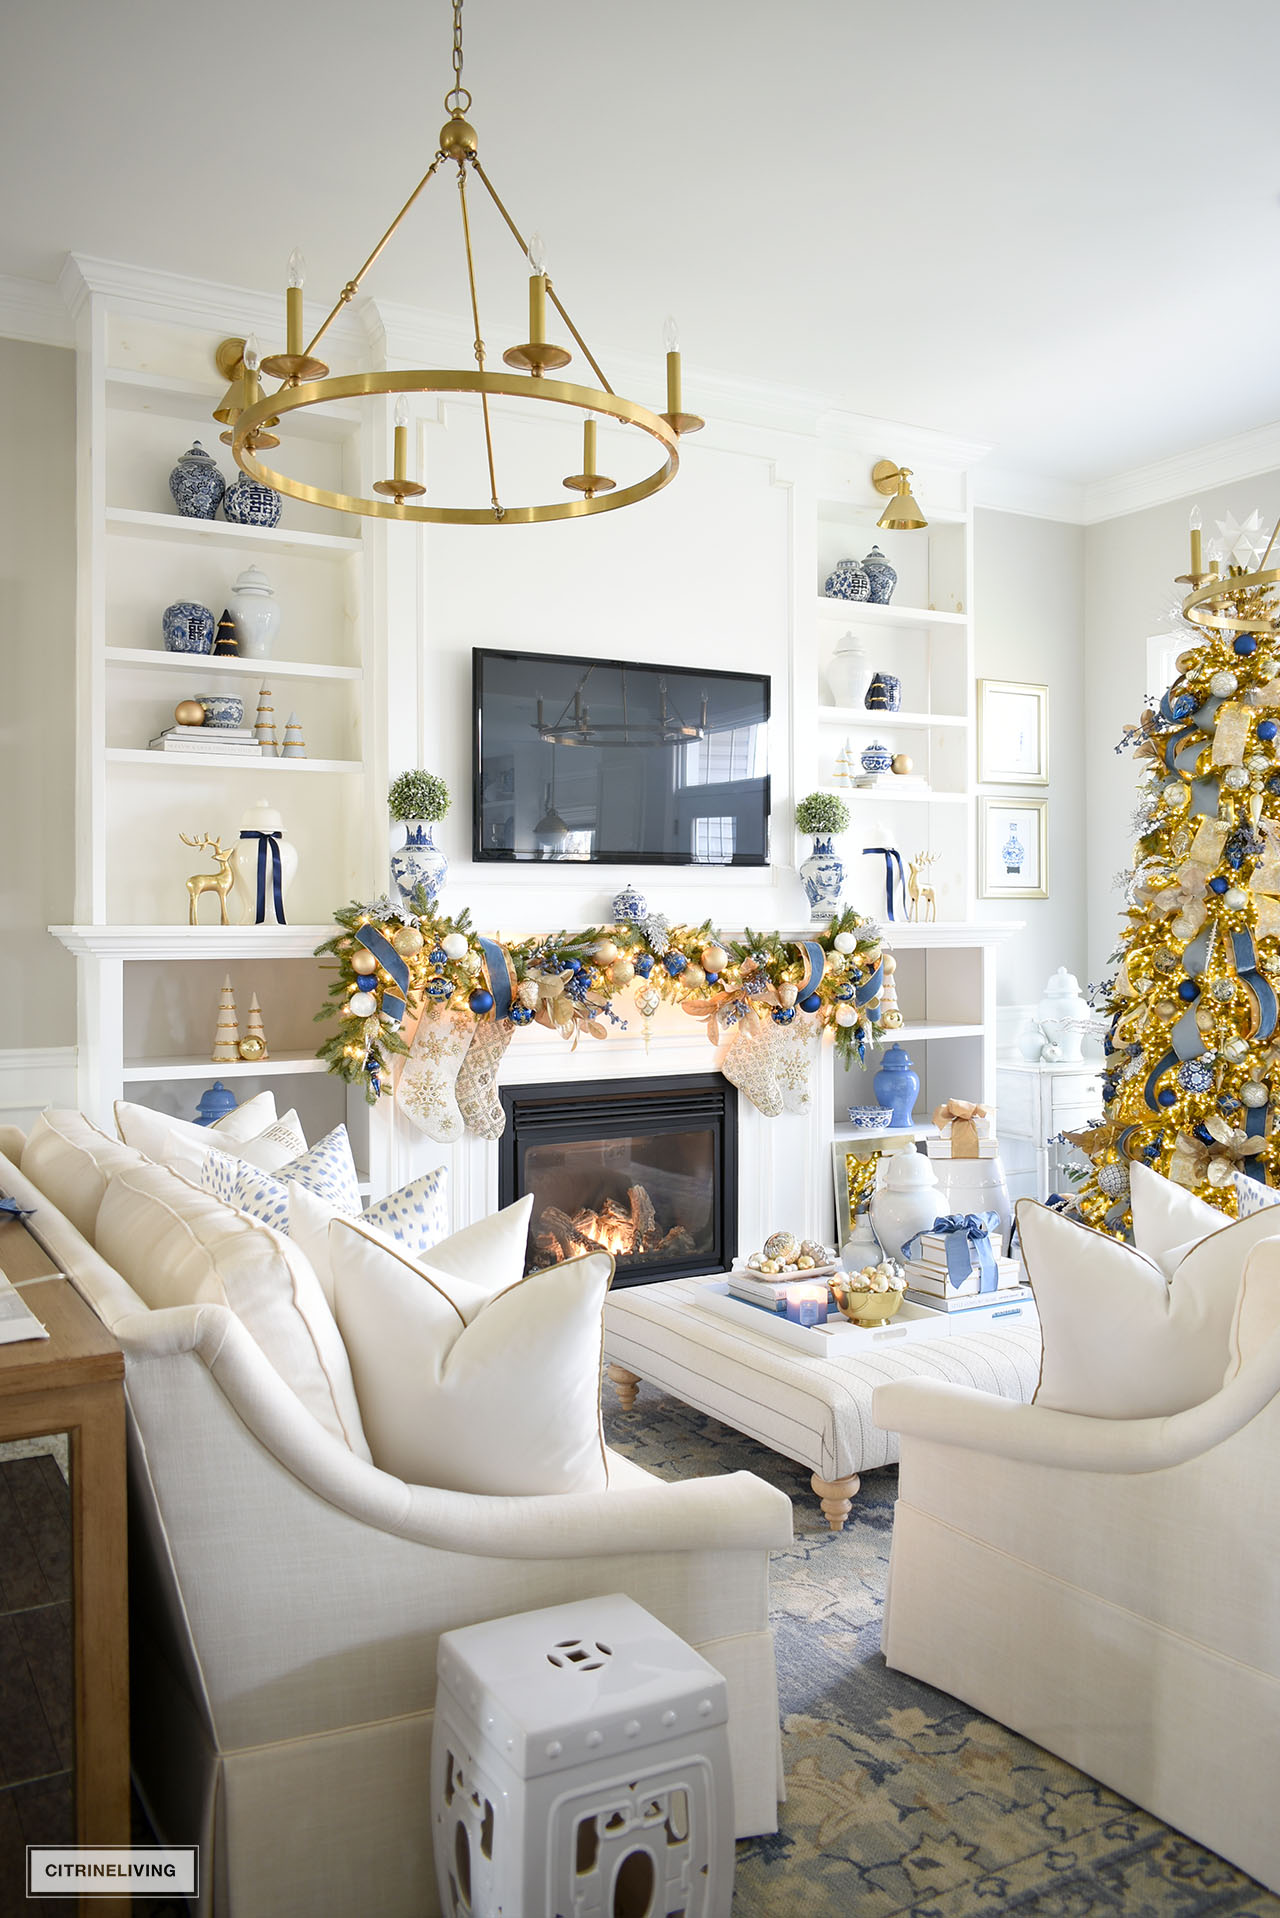 Living room decorated for christmas with white sofas, blue, white and gold holiday decor.